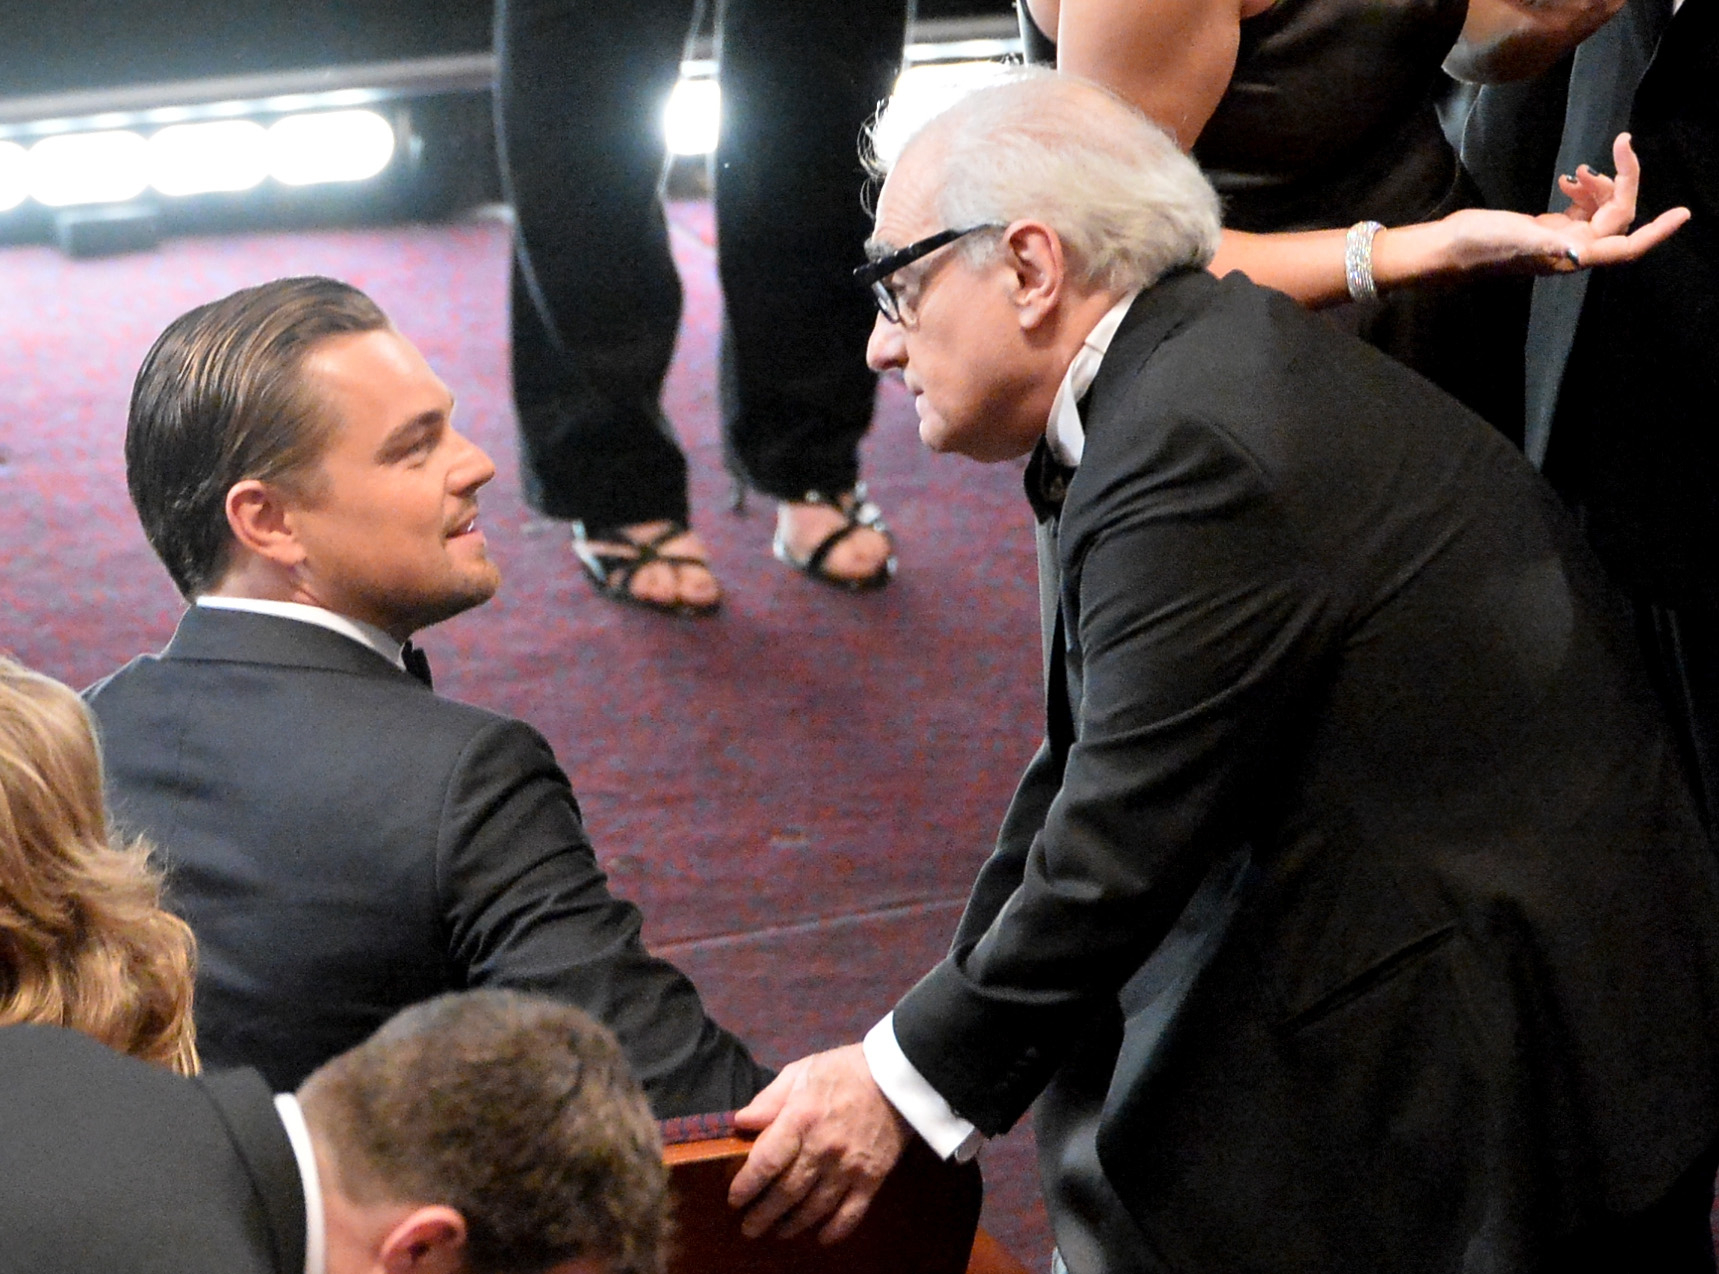 Leonardo DiCaprio seated, shaking hands with Martin Scorsese who is standing, both in formal suits at an event